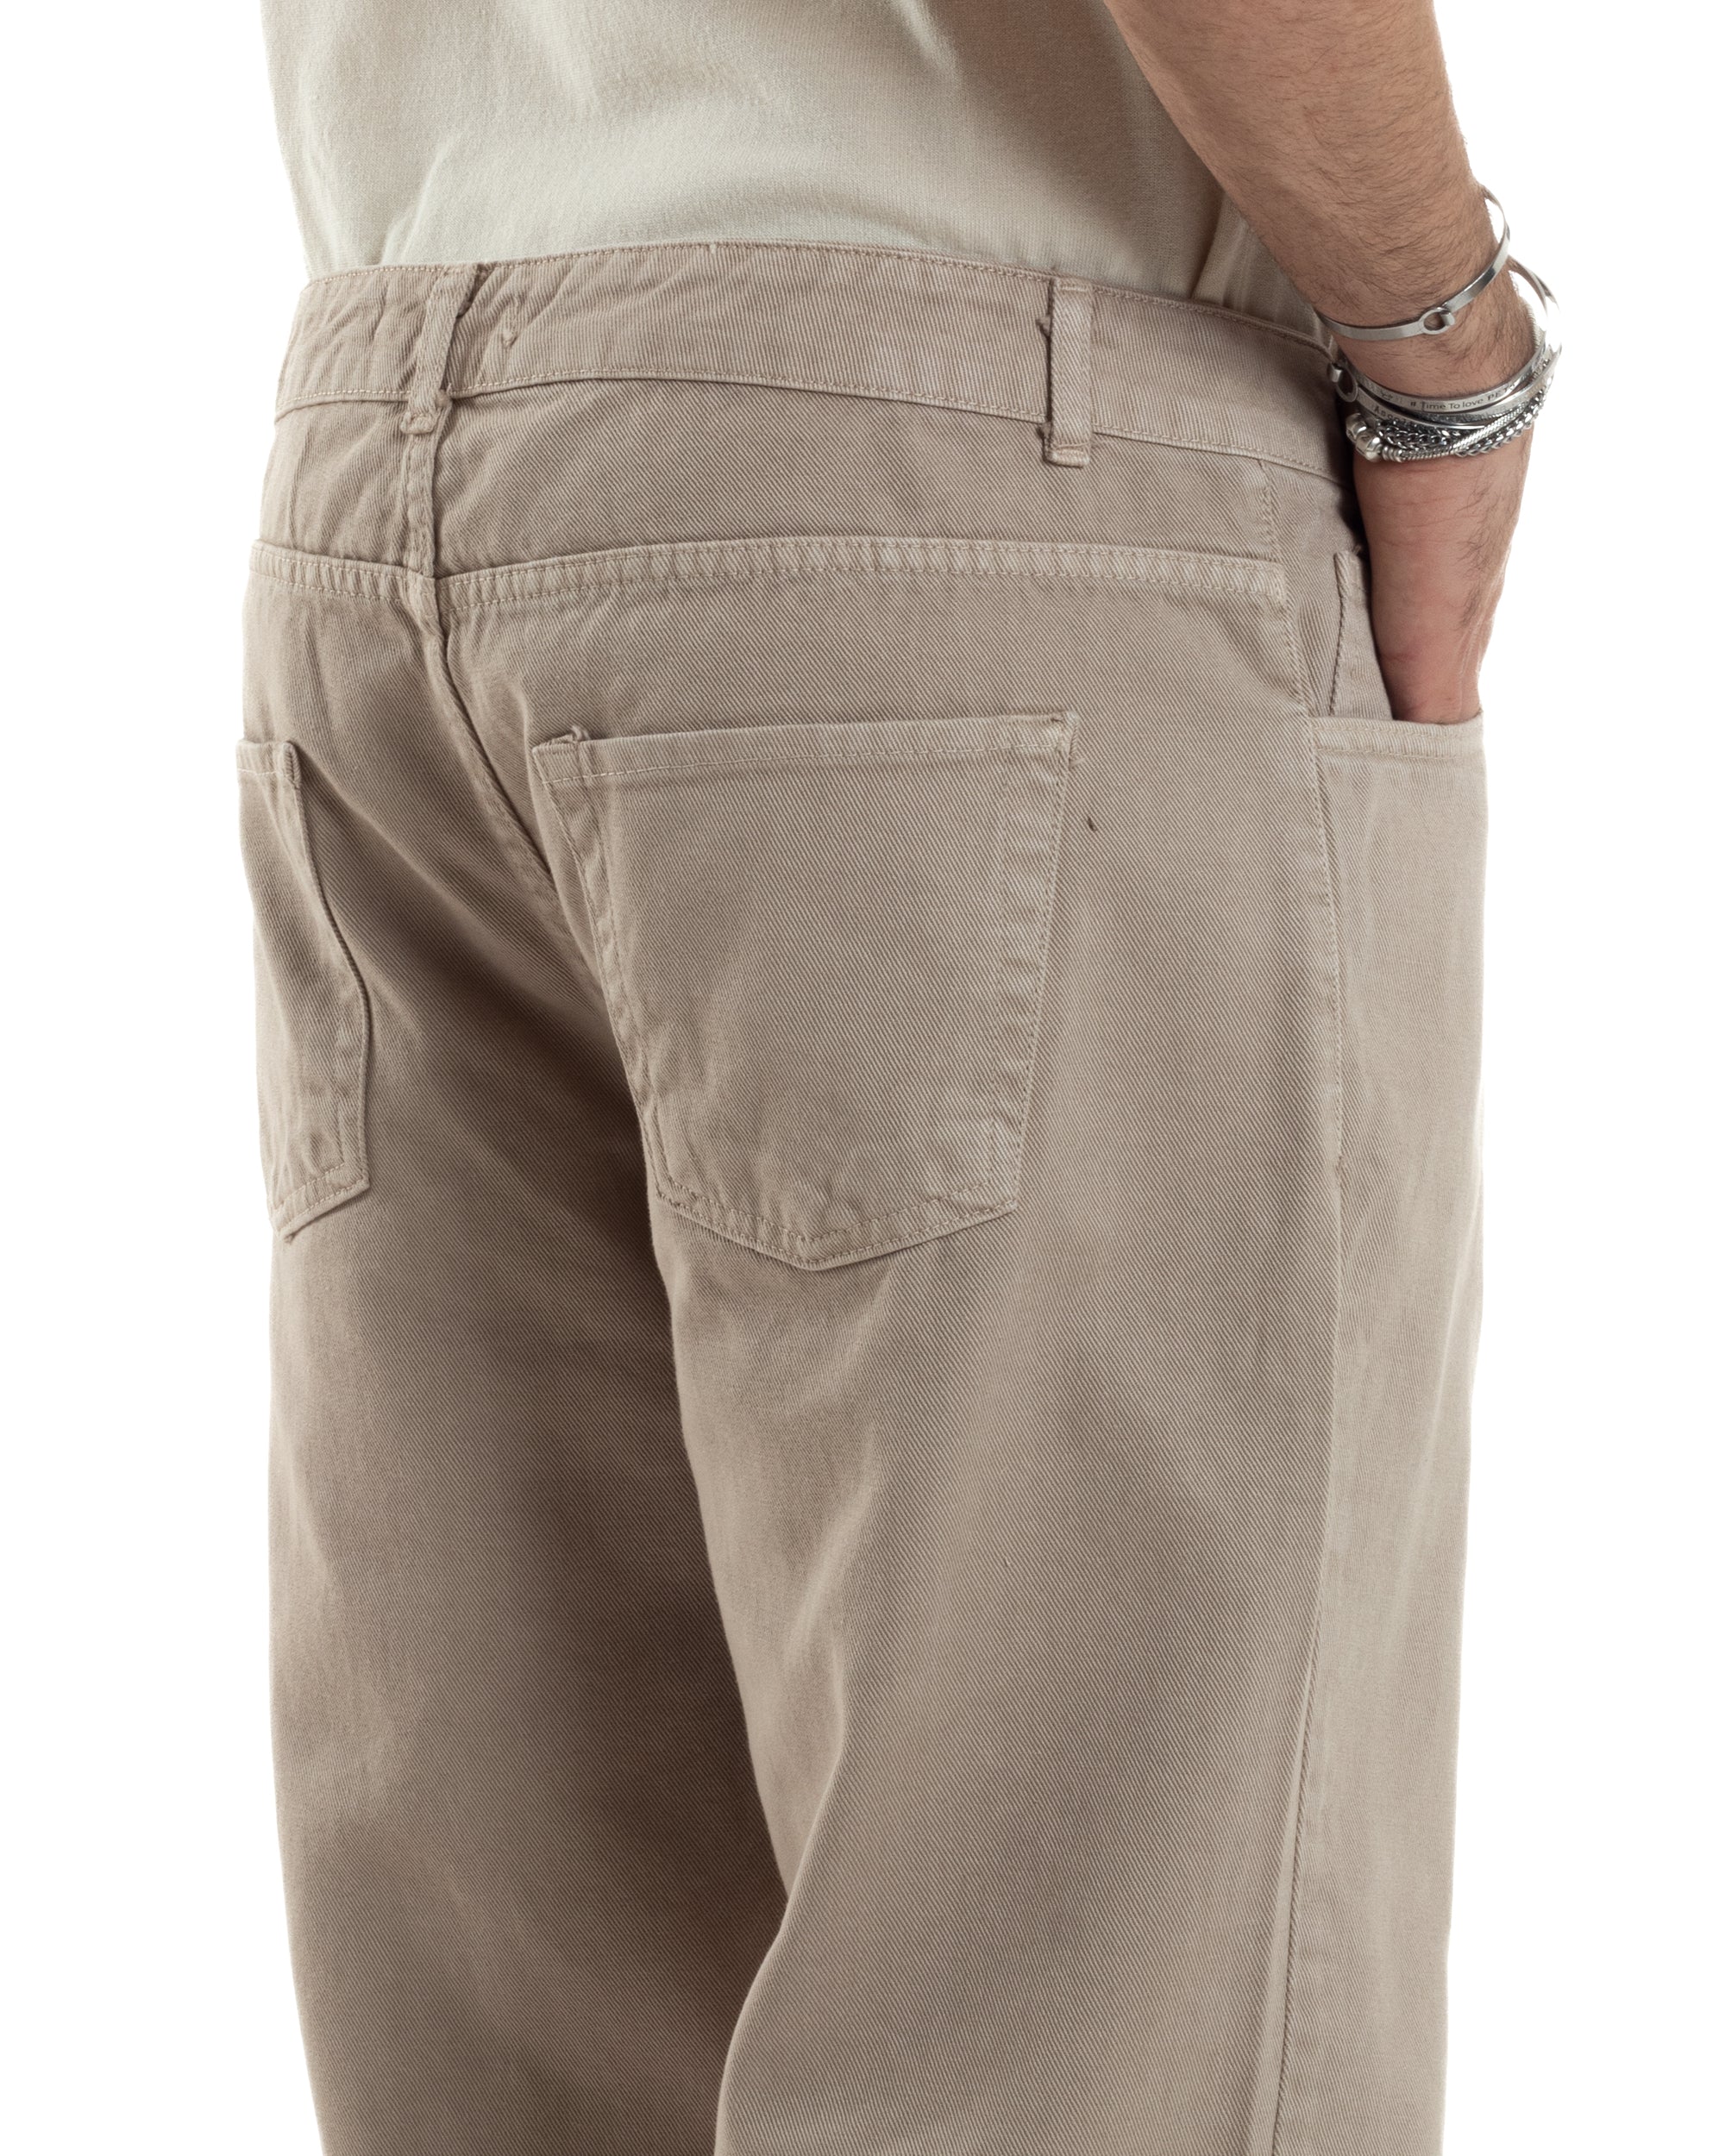 Men's Long Jeans Pants Solid Color Five Pockets Beige Straight Fit GIOSAL-P5666A